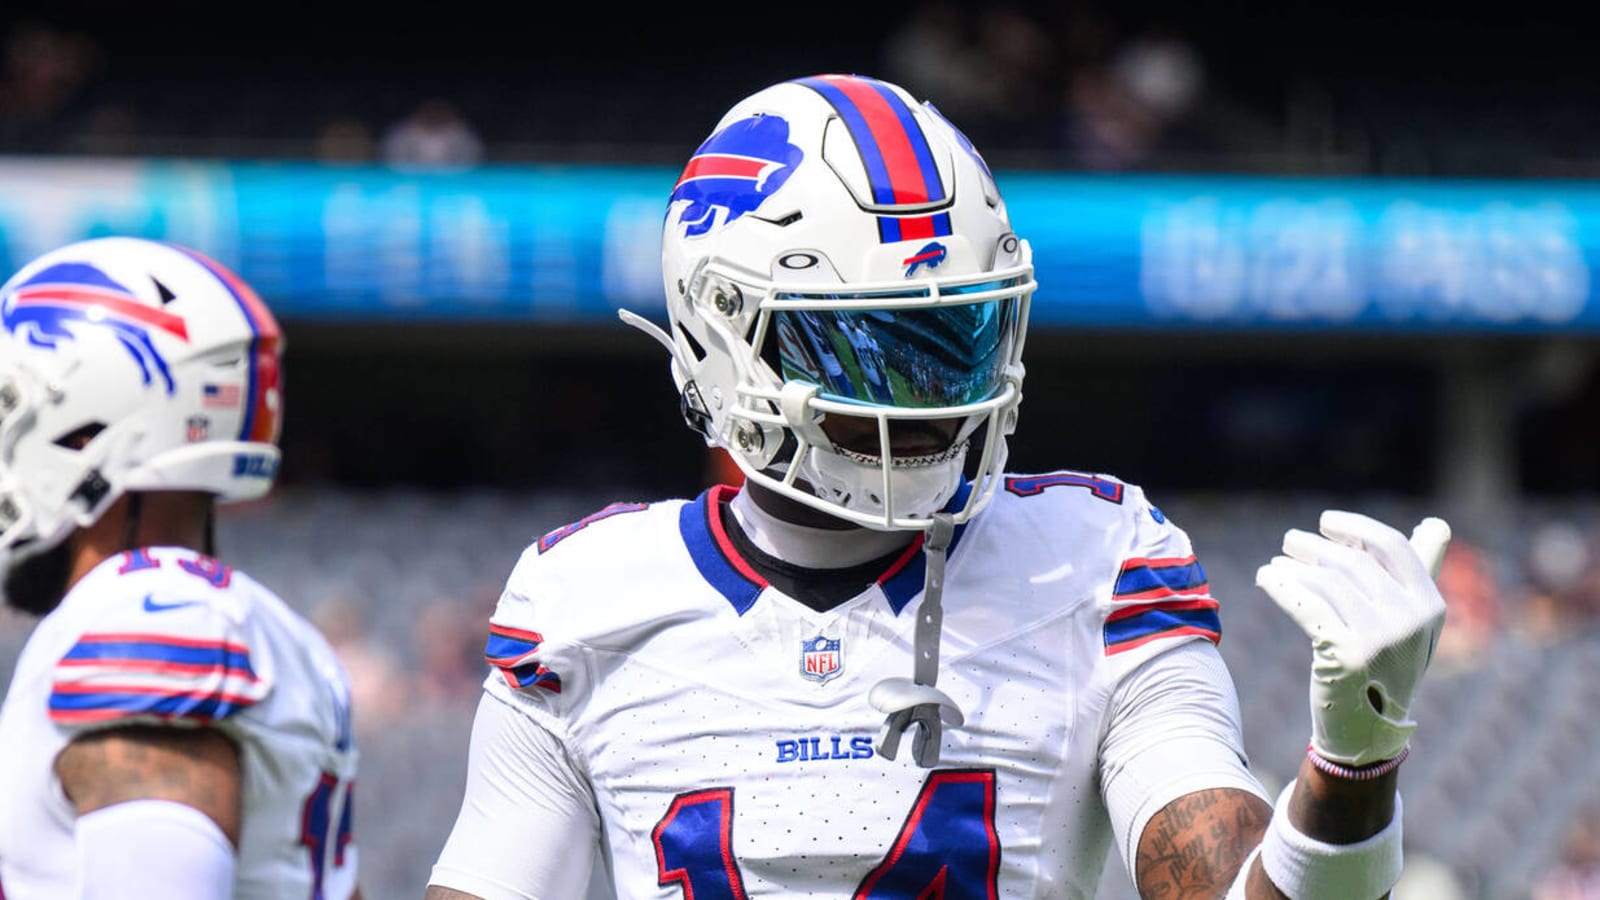 Bills reporter claims 'ownership' for comments about WR Diggs